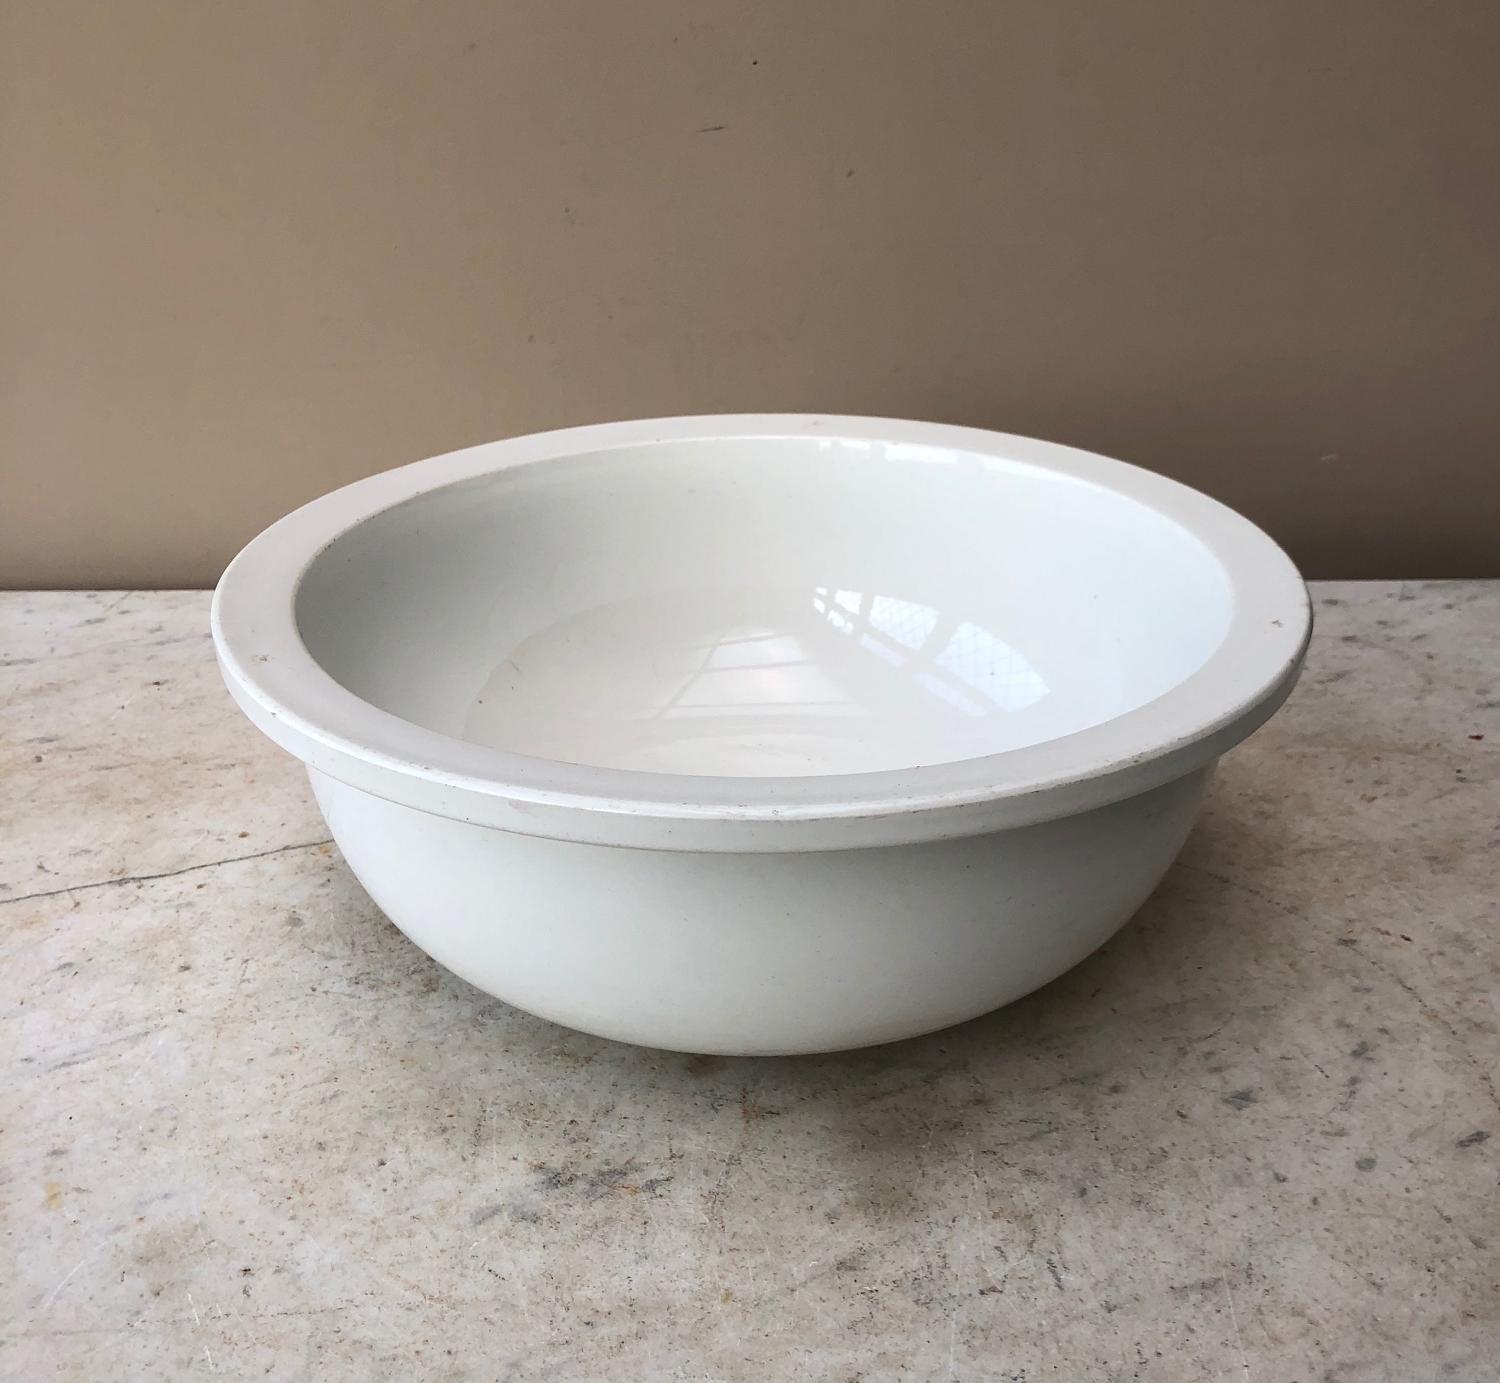 Super Early 20th Century White Ironstone Bowl - Perfect Fruit Bowl